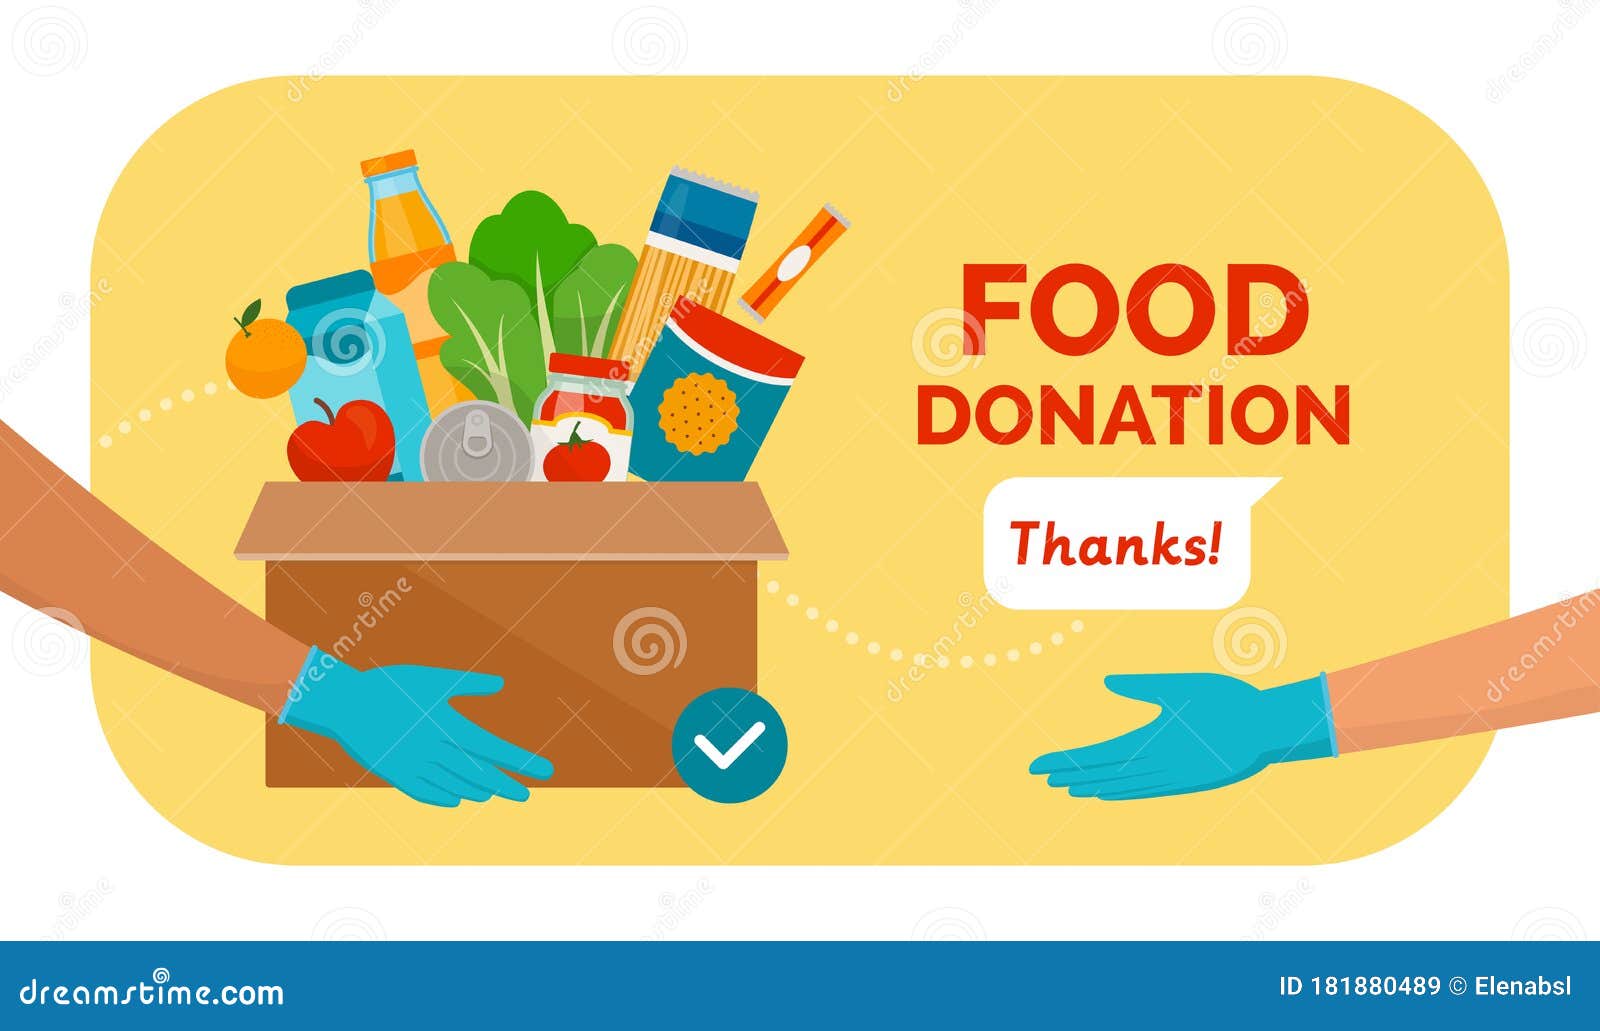 food and grocery donation